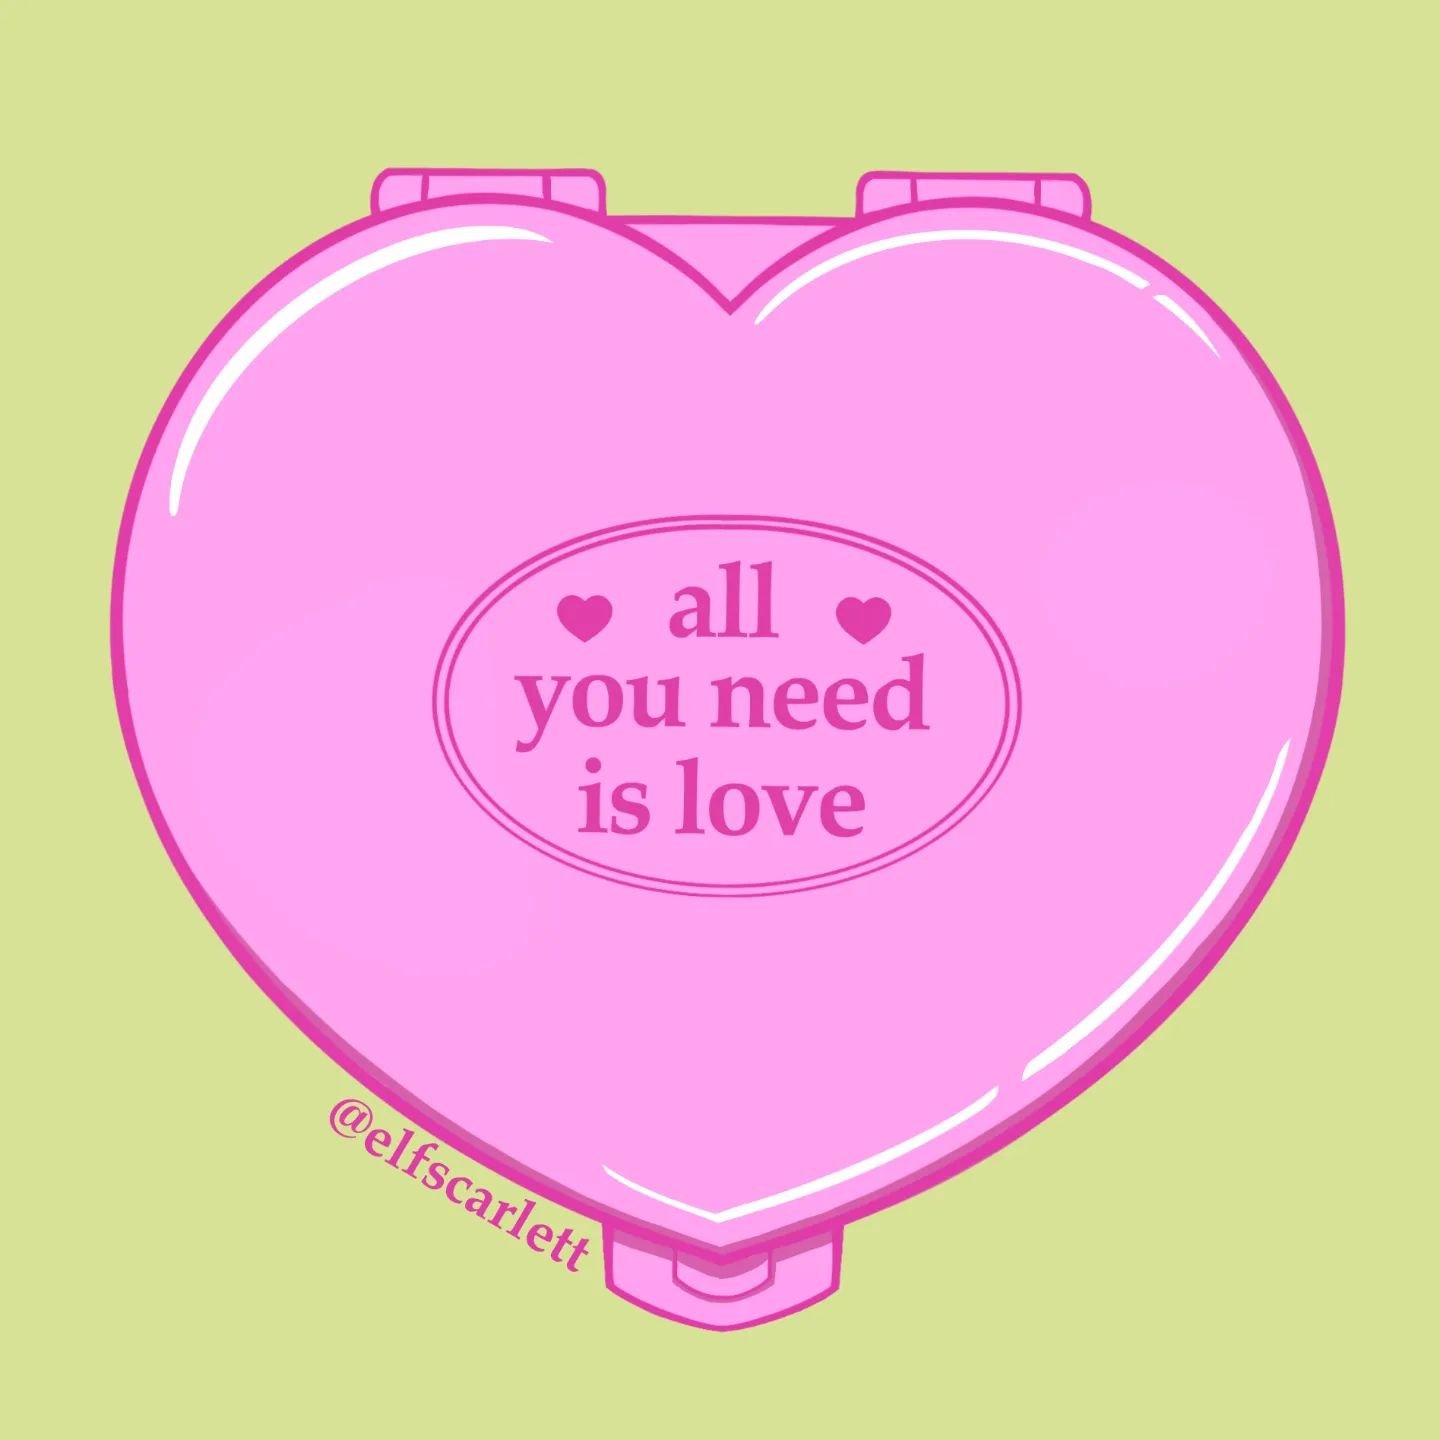 Love is all you need 💗

Digital illustration by @elfscarlett made on @procreate. 
Hand-drawn valentines day illustration in pastel tones (pink and green) featuring text with lyrics by the Beatles. Inspired by 1990s Polly Pocket compacts and Valentin